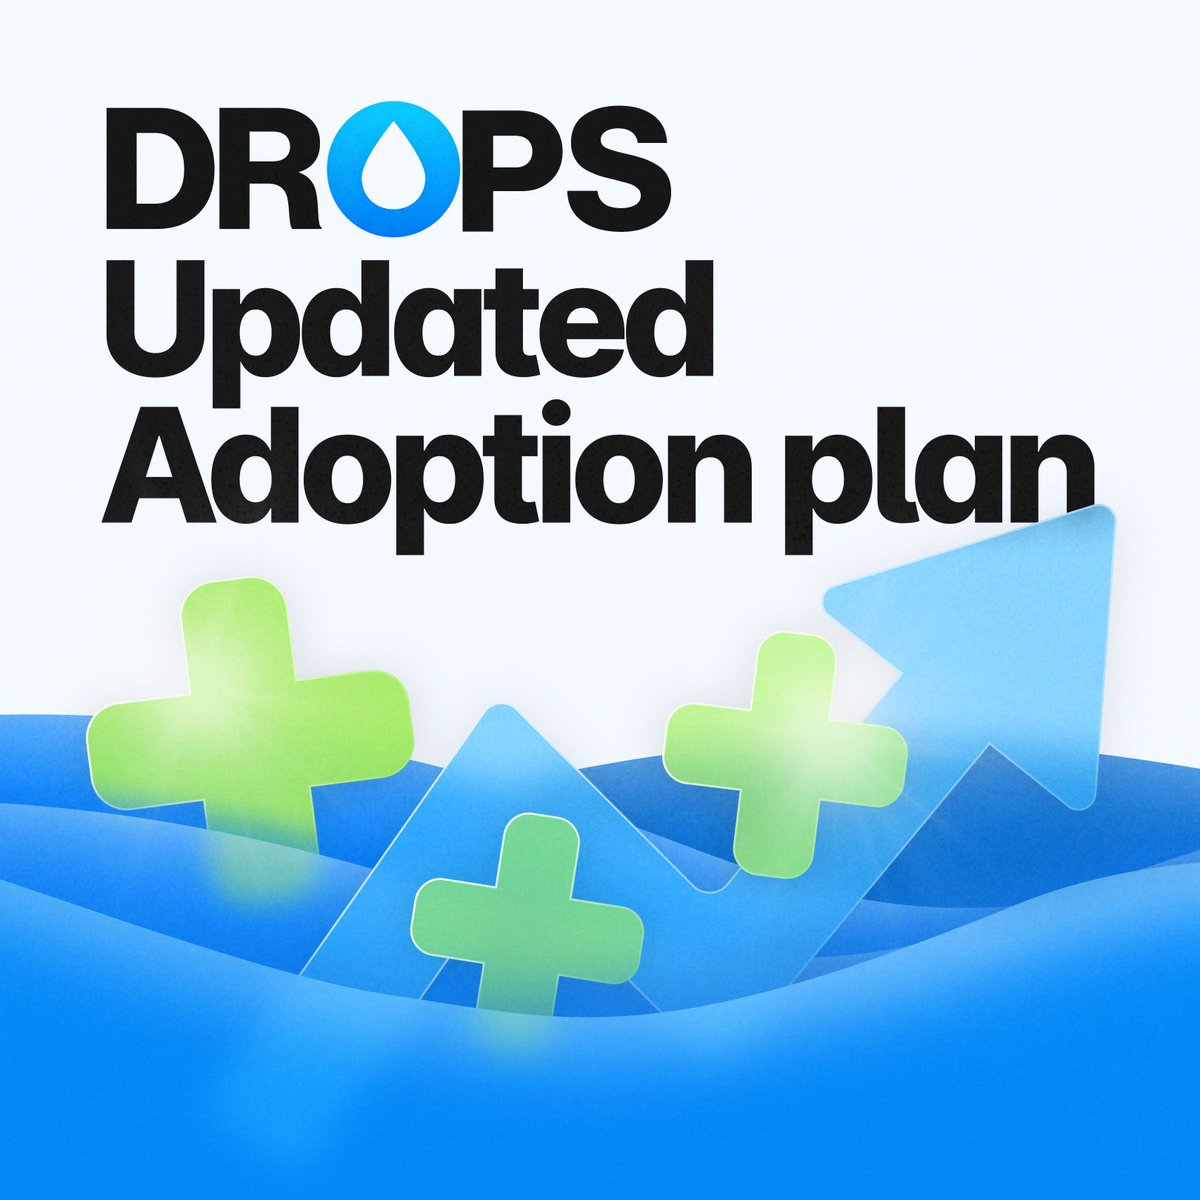 With groundbreaking new protocols coming to the $DROPS Marketplace in the v3.0 update, we have revised and updated our adoption plan.

Take a deep dive into the immediate ways $DROPS plans to create a continuously growing market for locked liquidity. 

medium.com/@dropsether/dr…